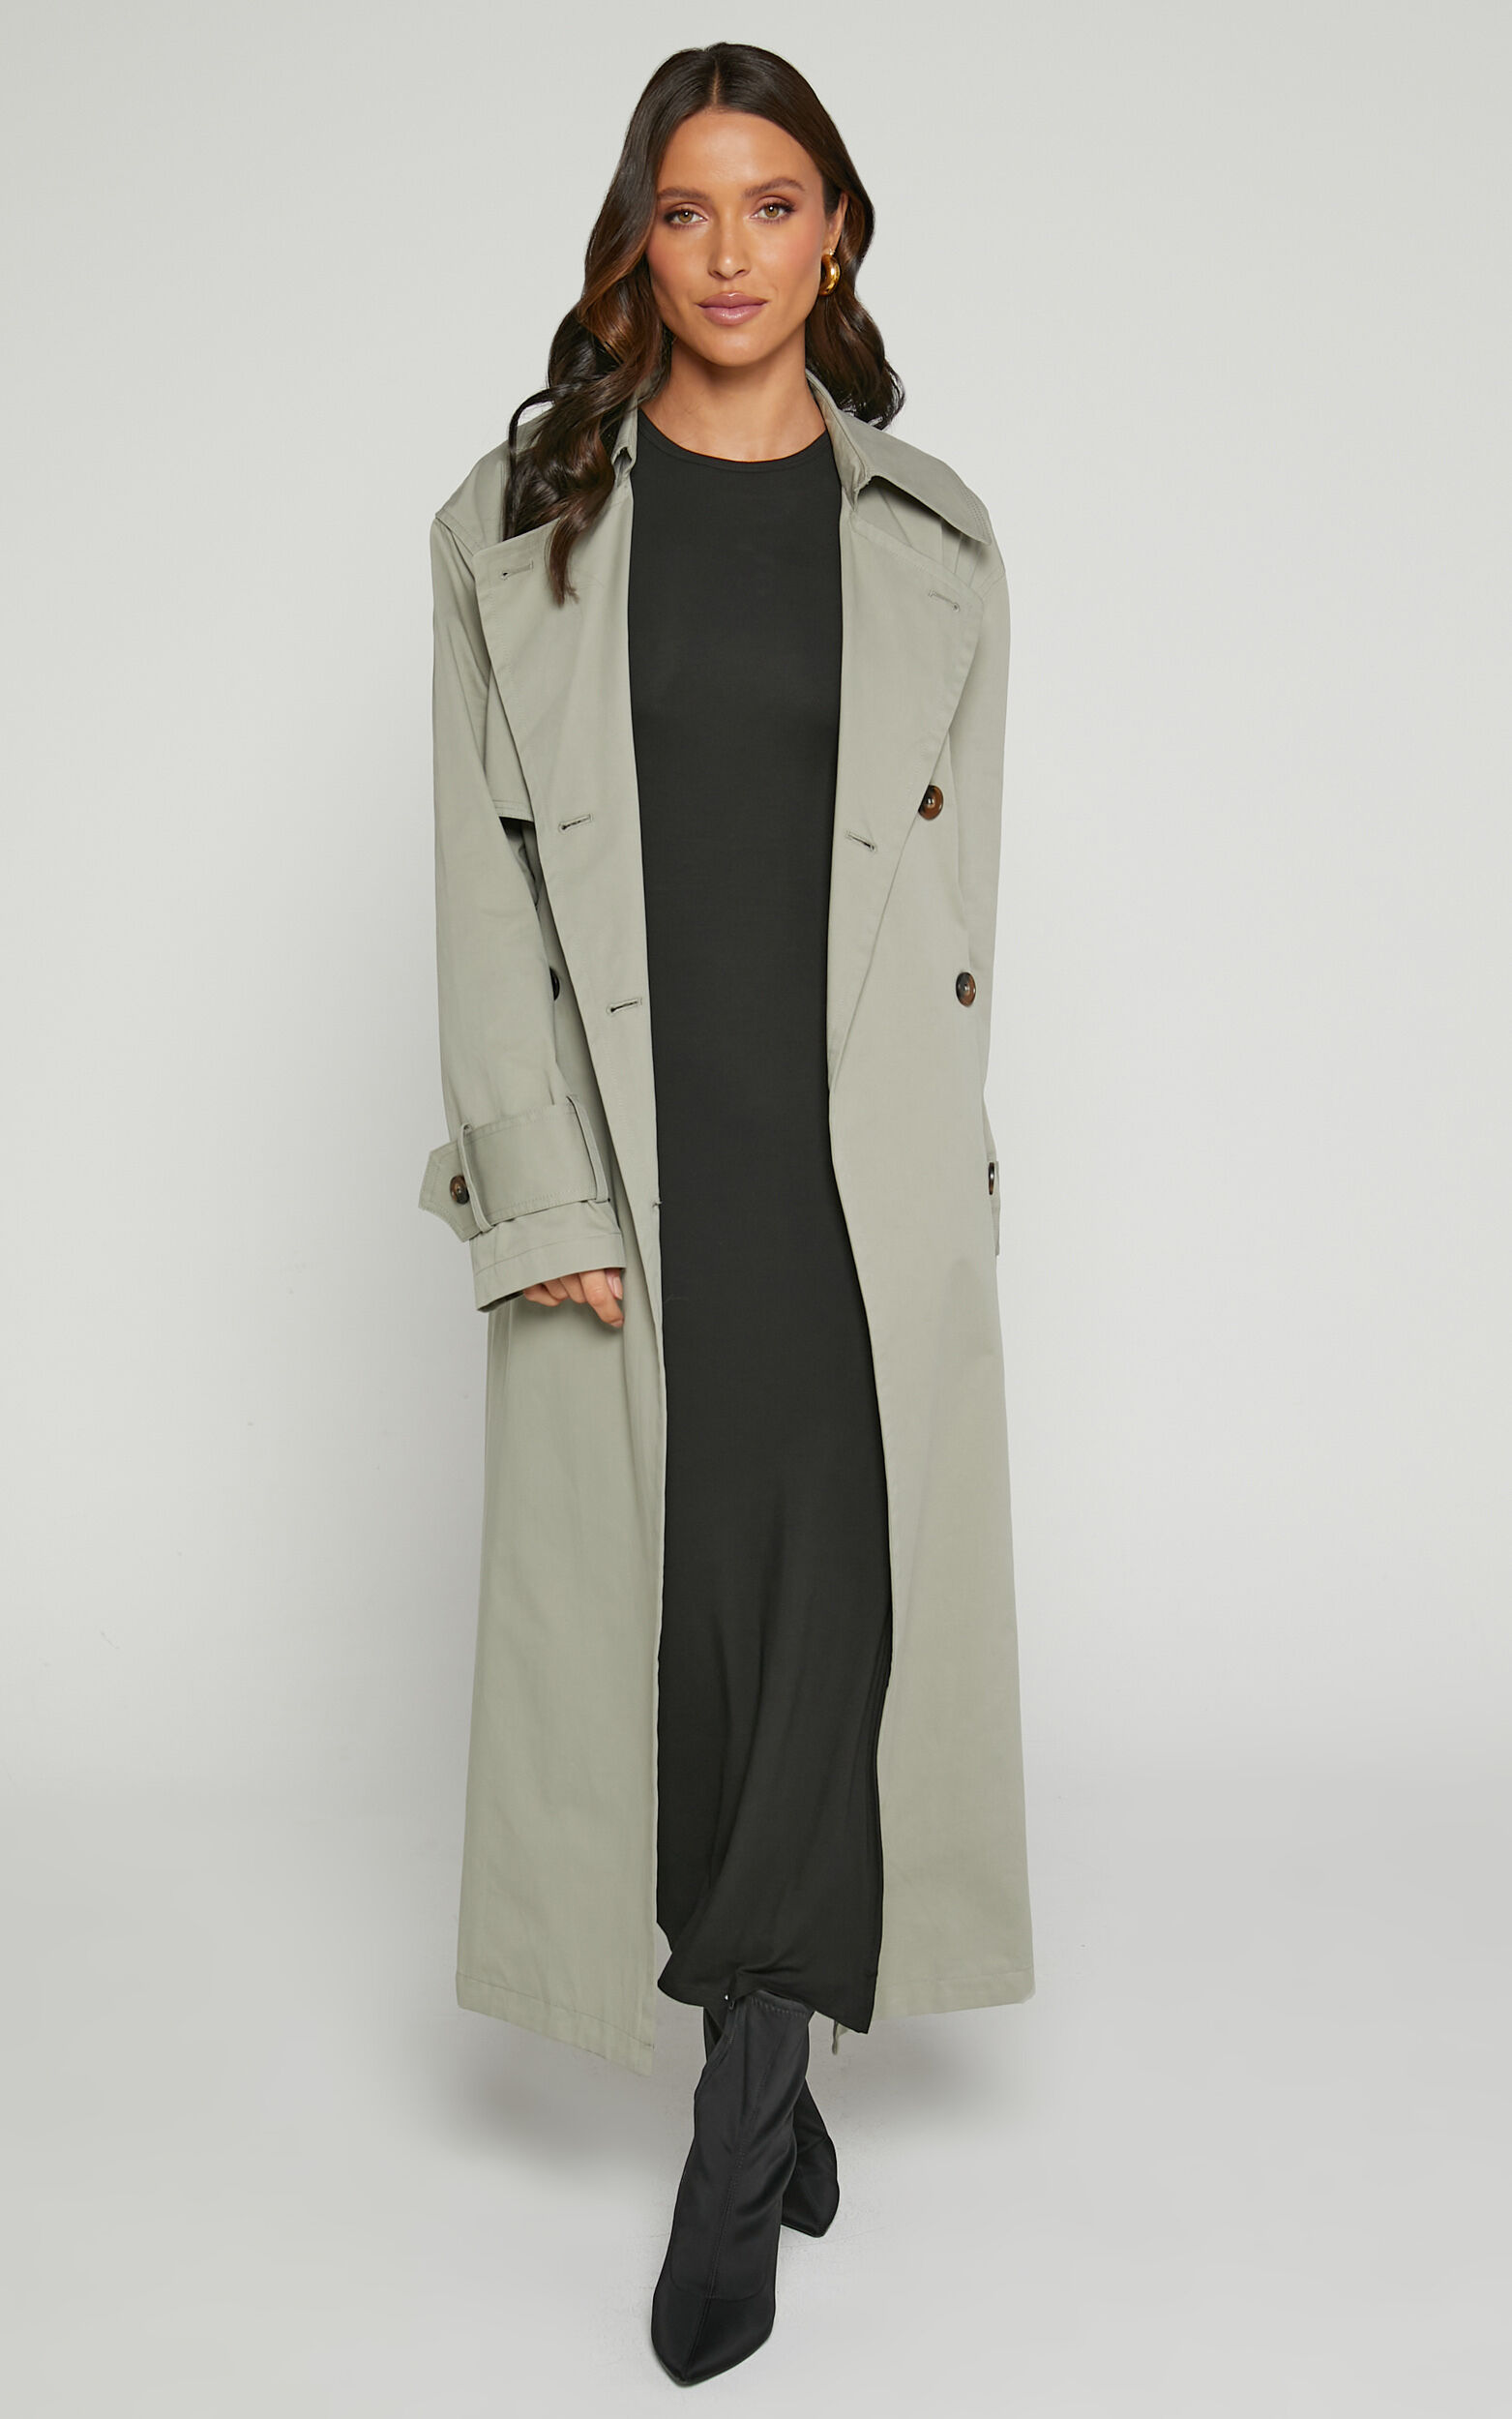 Avah Trench Coat - Double Breasted Tie Waist Coat in Washed Khaki